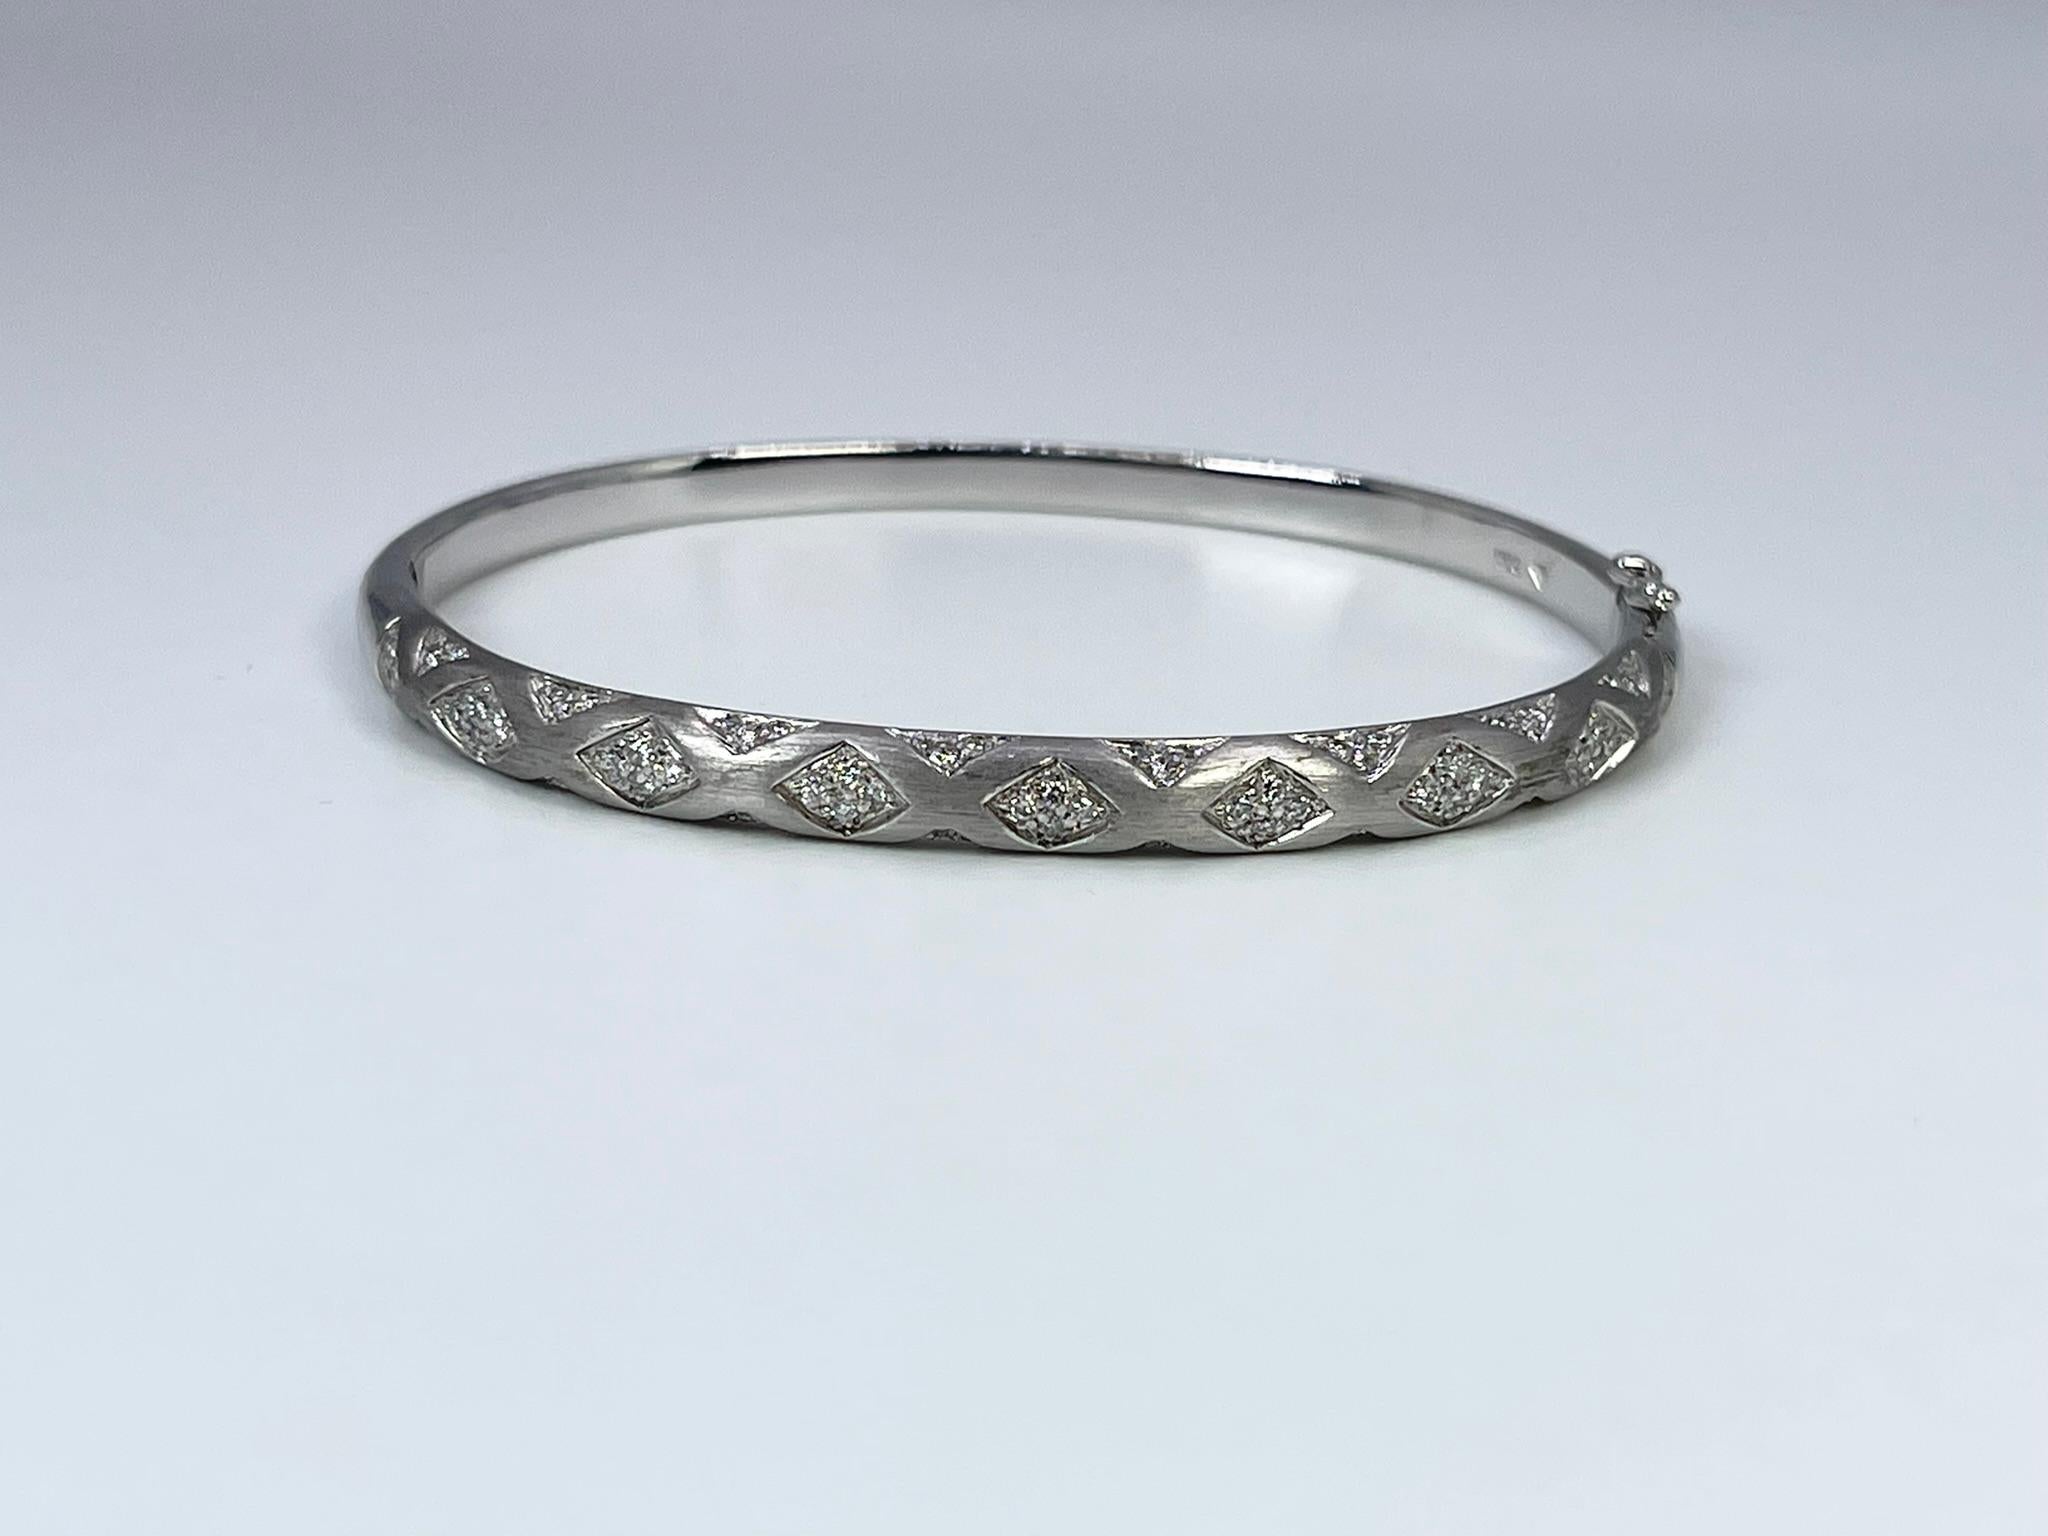 Bangle bracelet in 18KT white gold.

GRAM WEIGHT: 22.00gr
METAL: 18KT WHITE gold

NATURAL DIAMOND(S)
Cut: Round 
Color: G (average)
Clarity: VS-SI (average)
Carat: 0.55ct
Length: 2.5 inches long by 2 inches wide
Item number: 170-00035


WHAT YOU GET